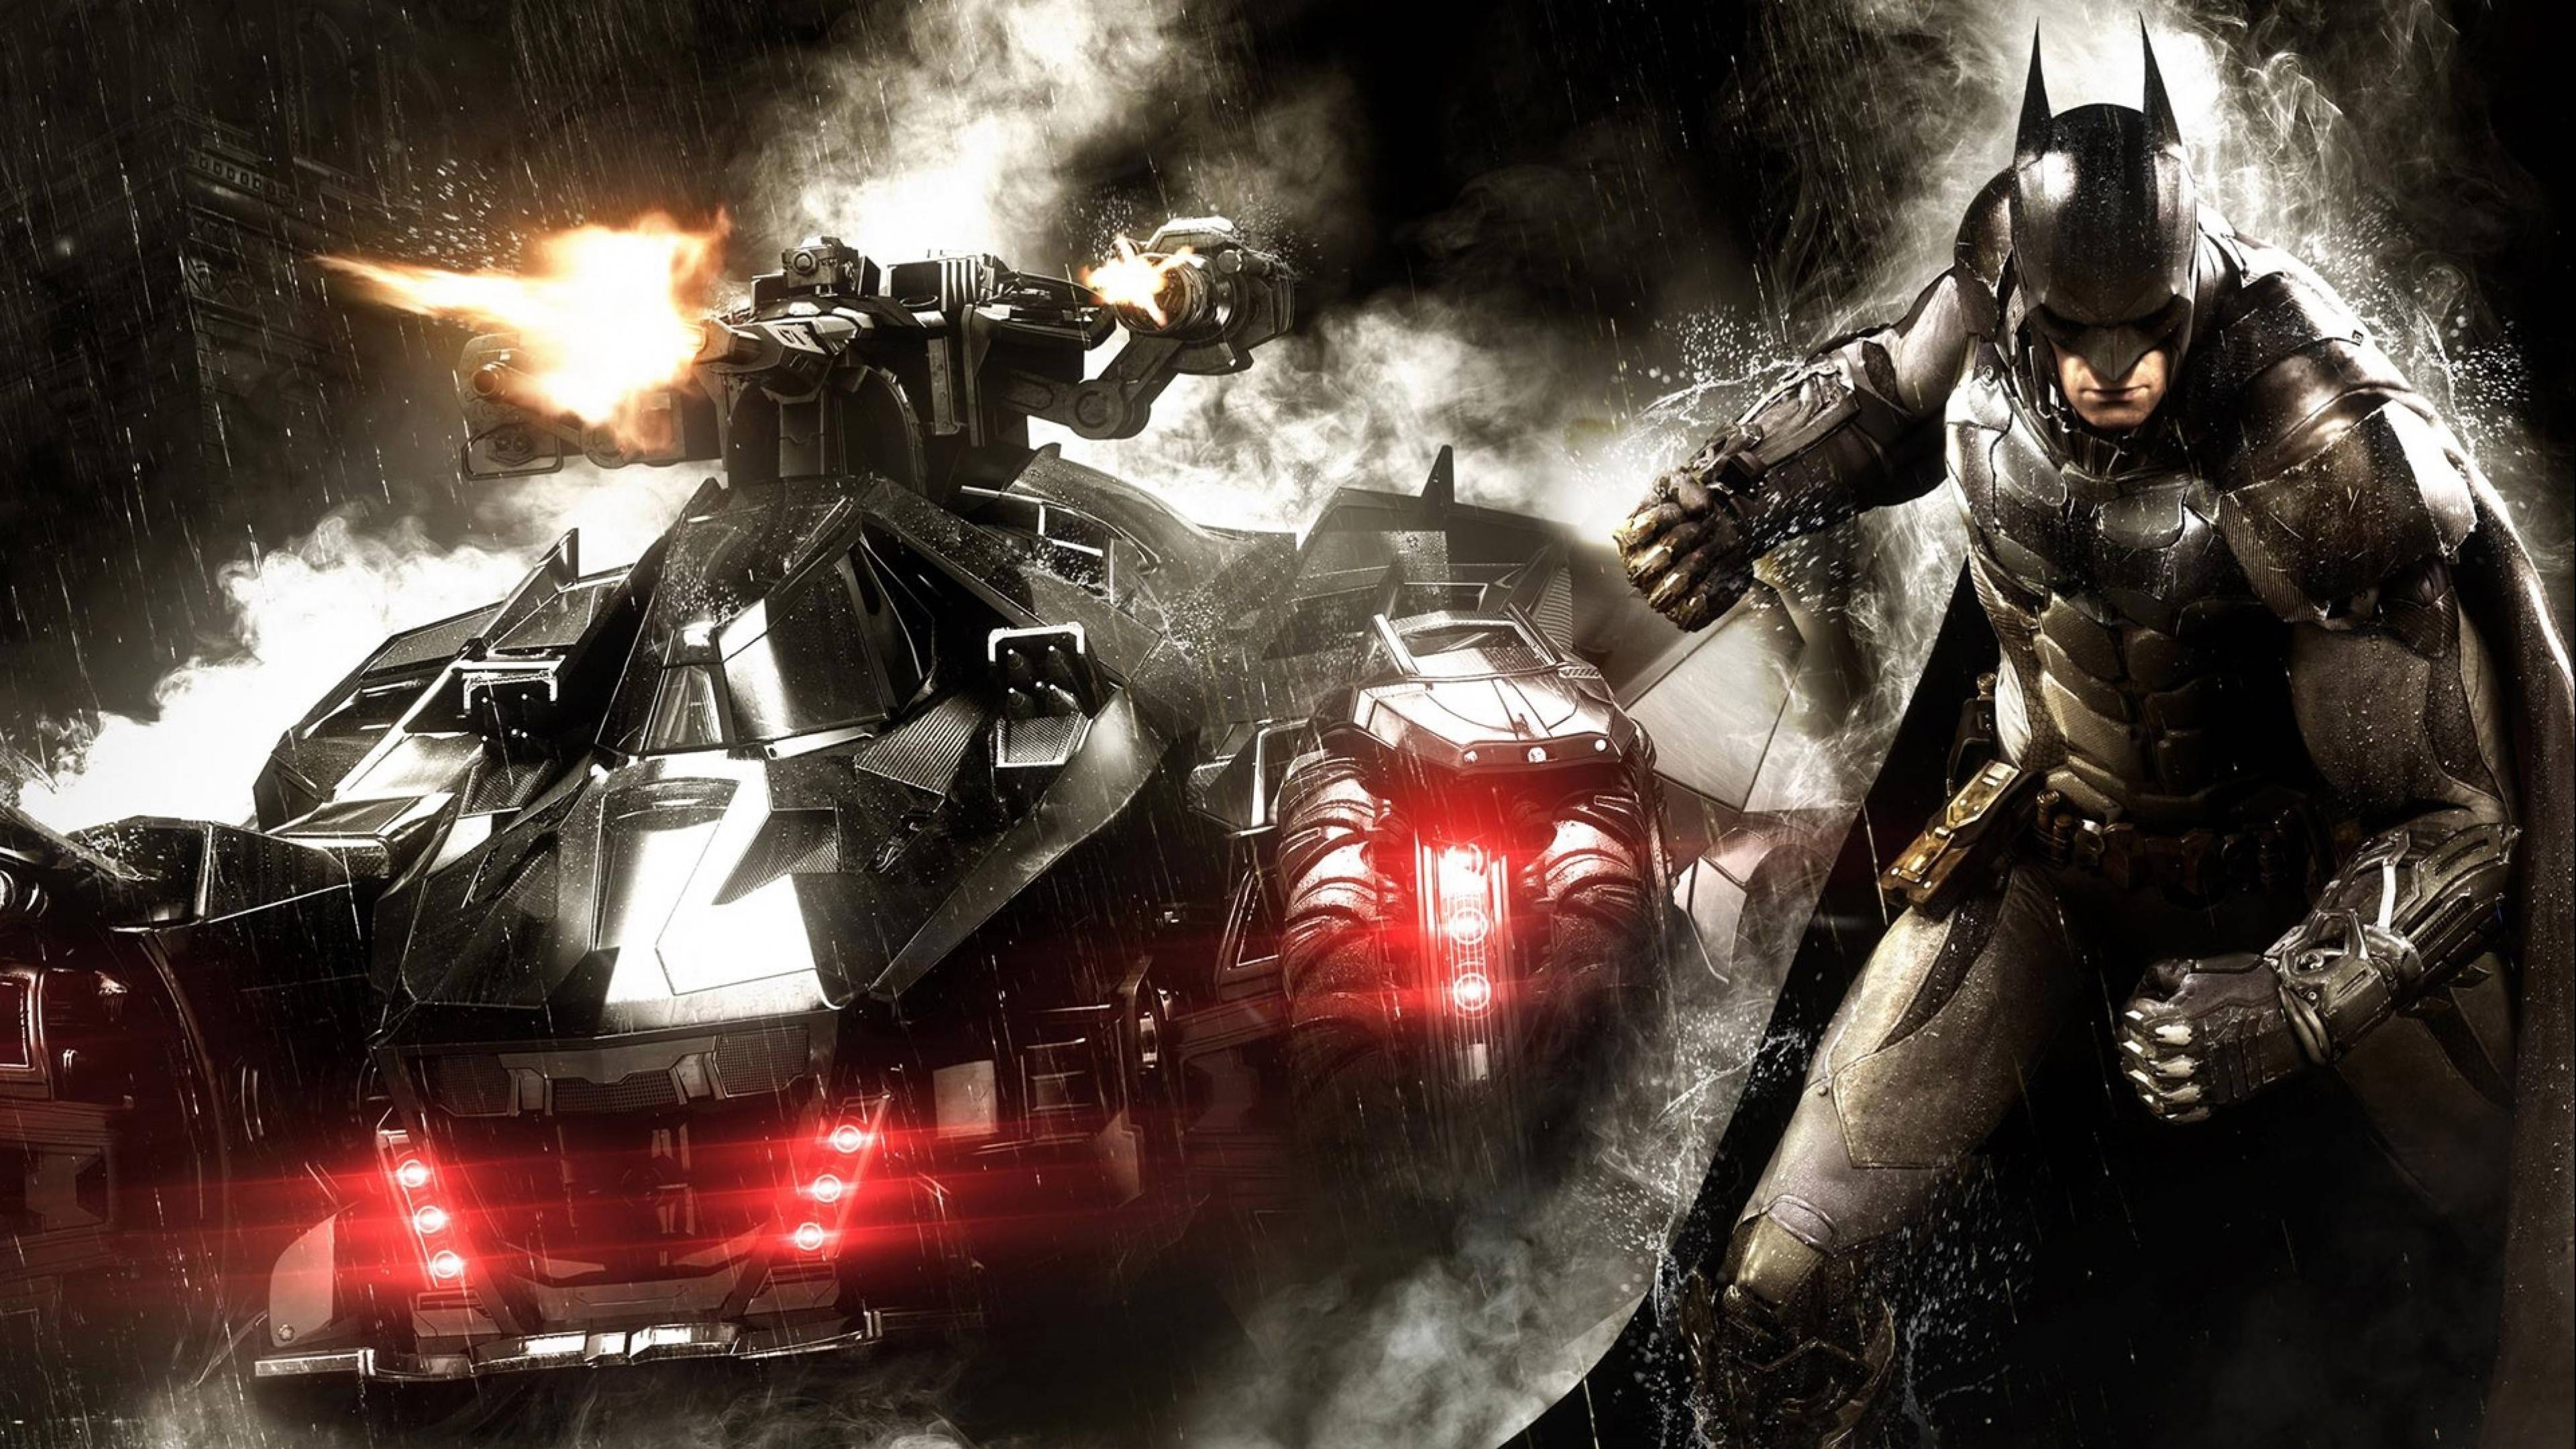 Batman Arkham Knight Hd Wallpapers For Mobile Phones And Laptops